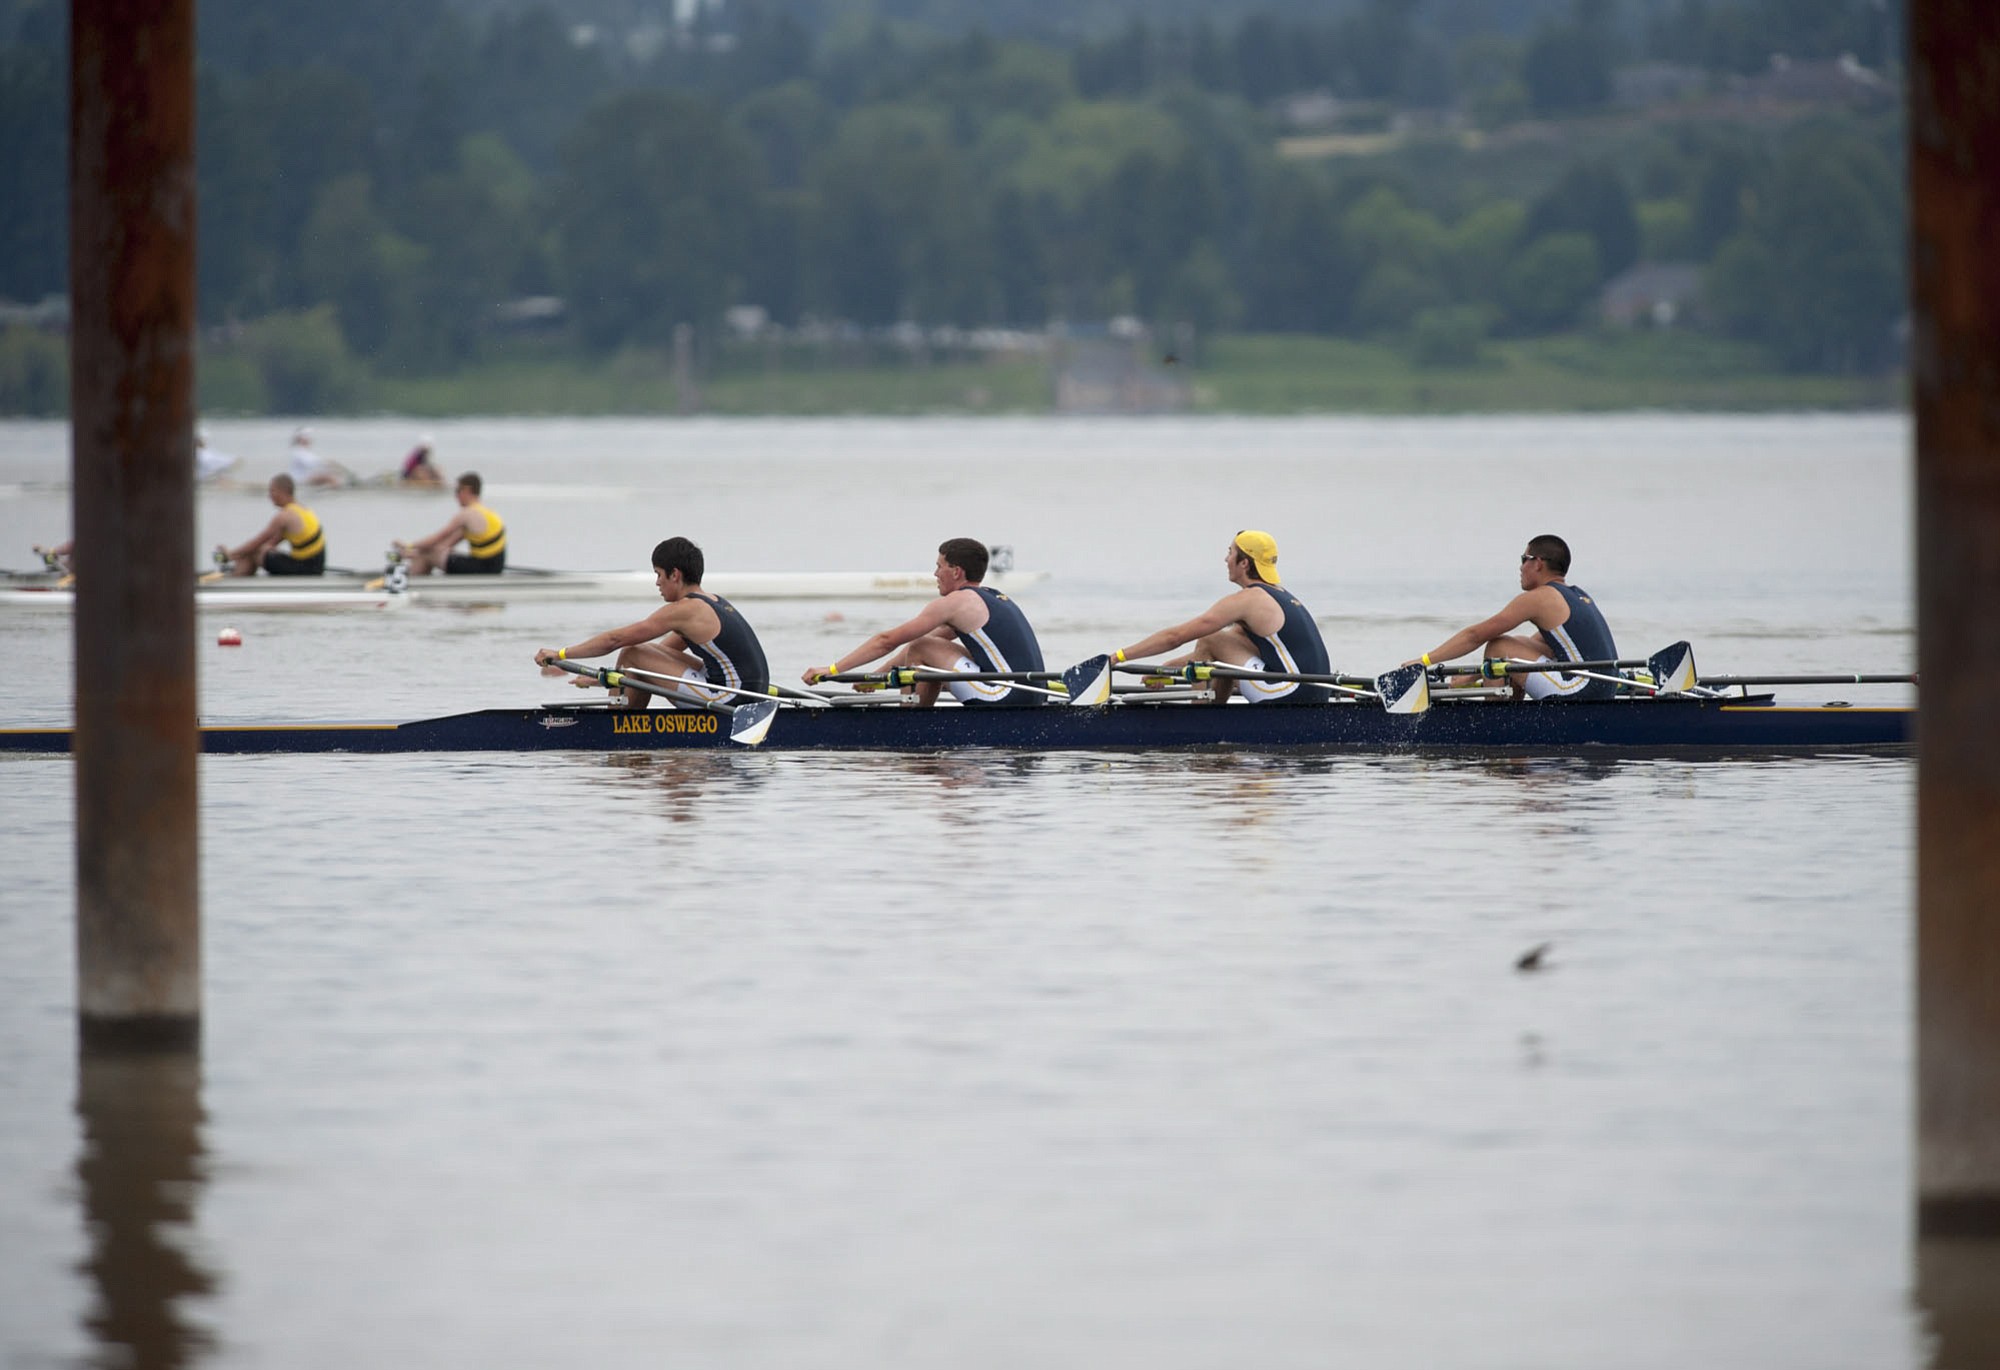 Crews teams row in races Friday on Vancouver Lake as part of the Pacific Northwest championships.